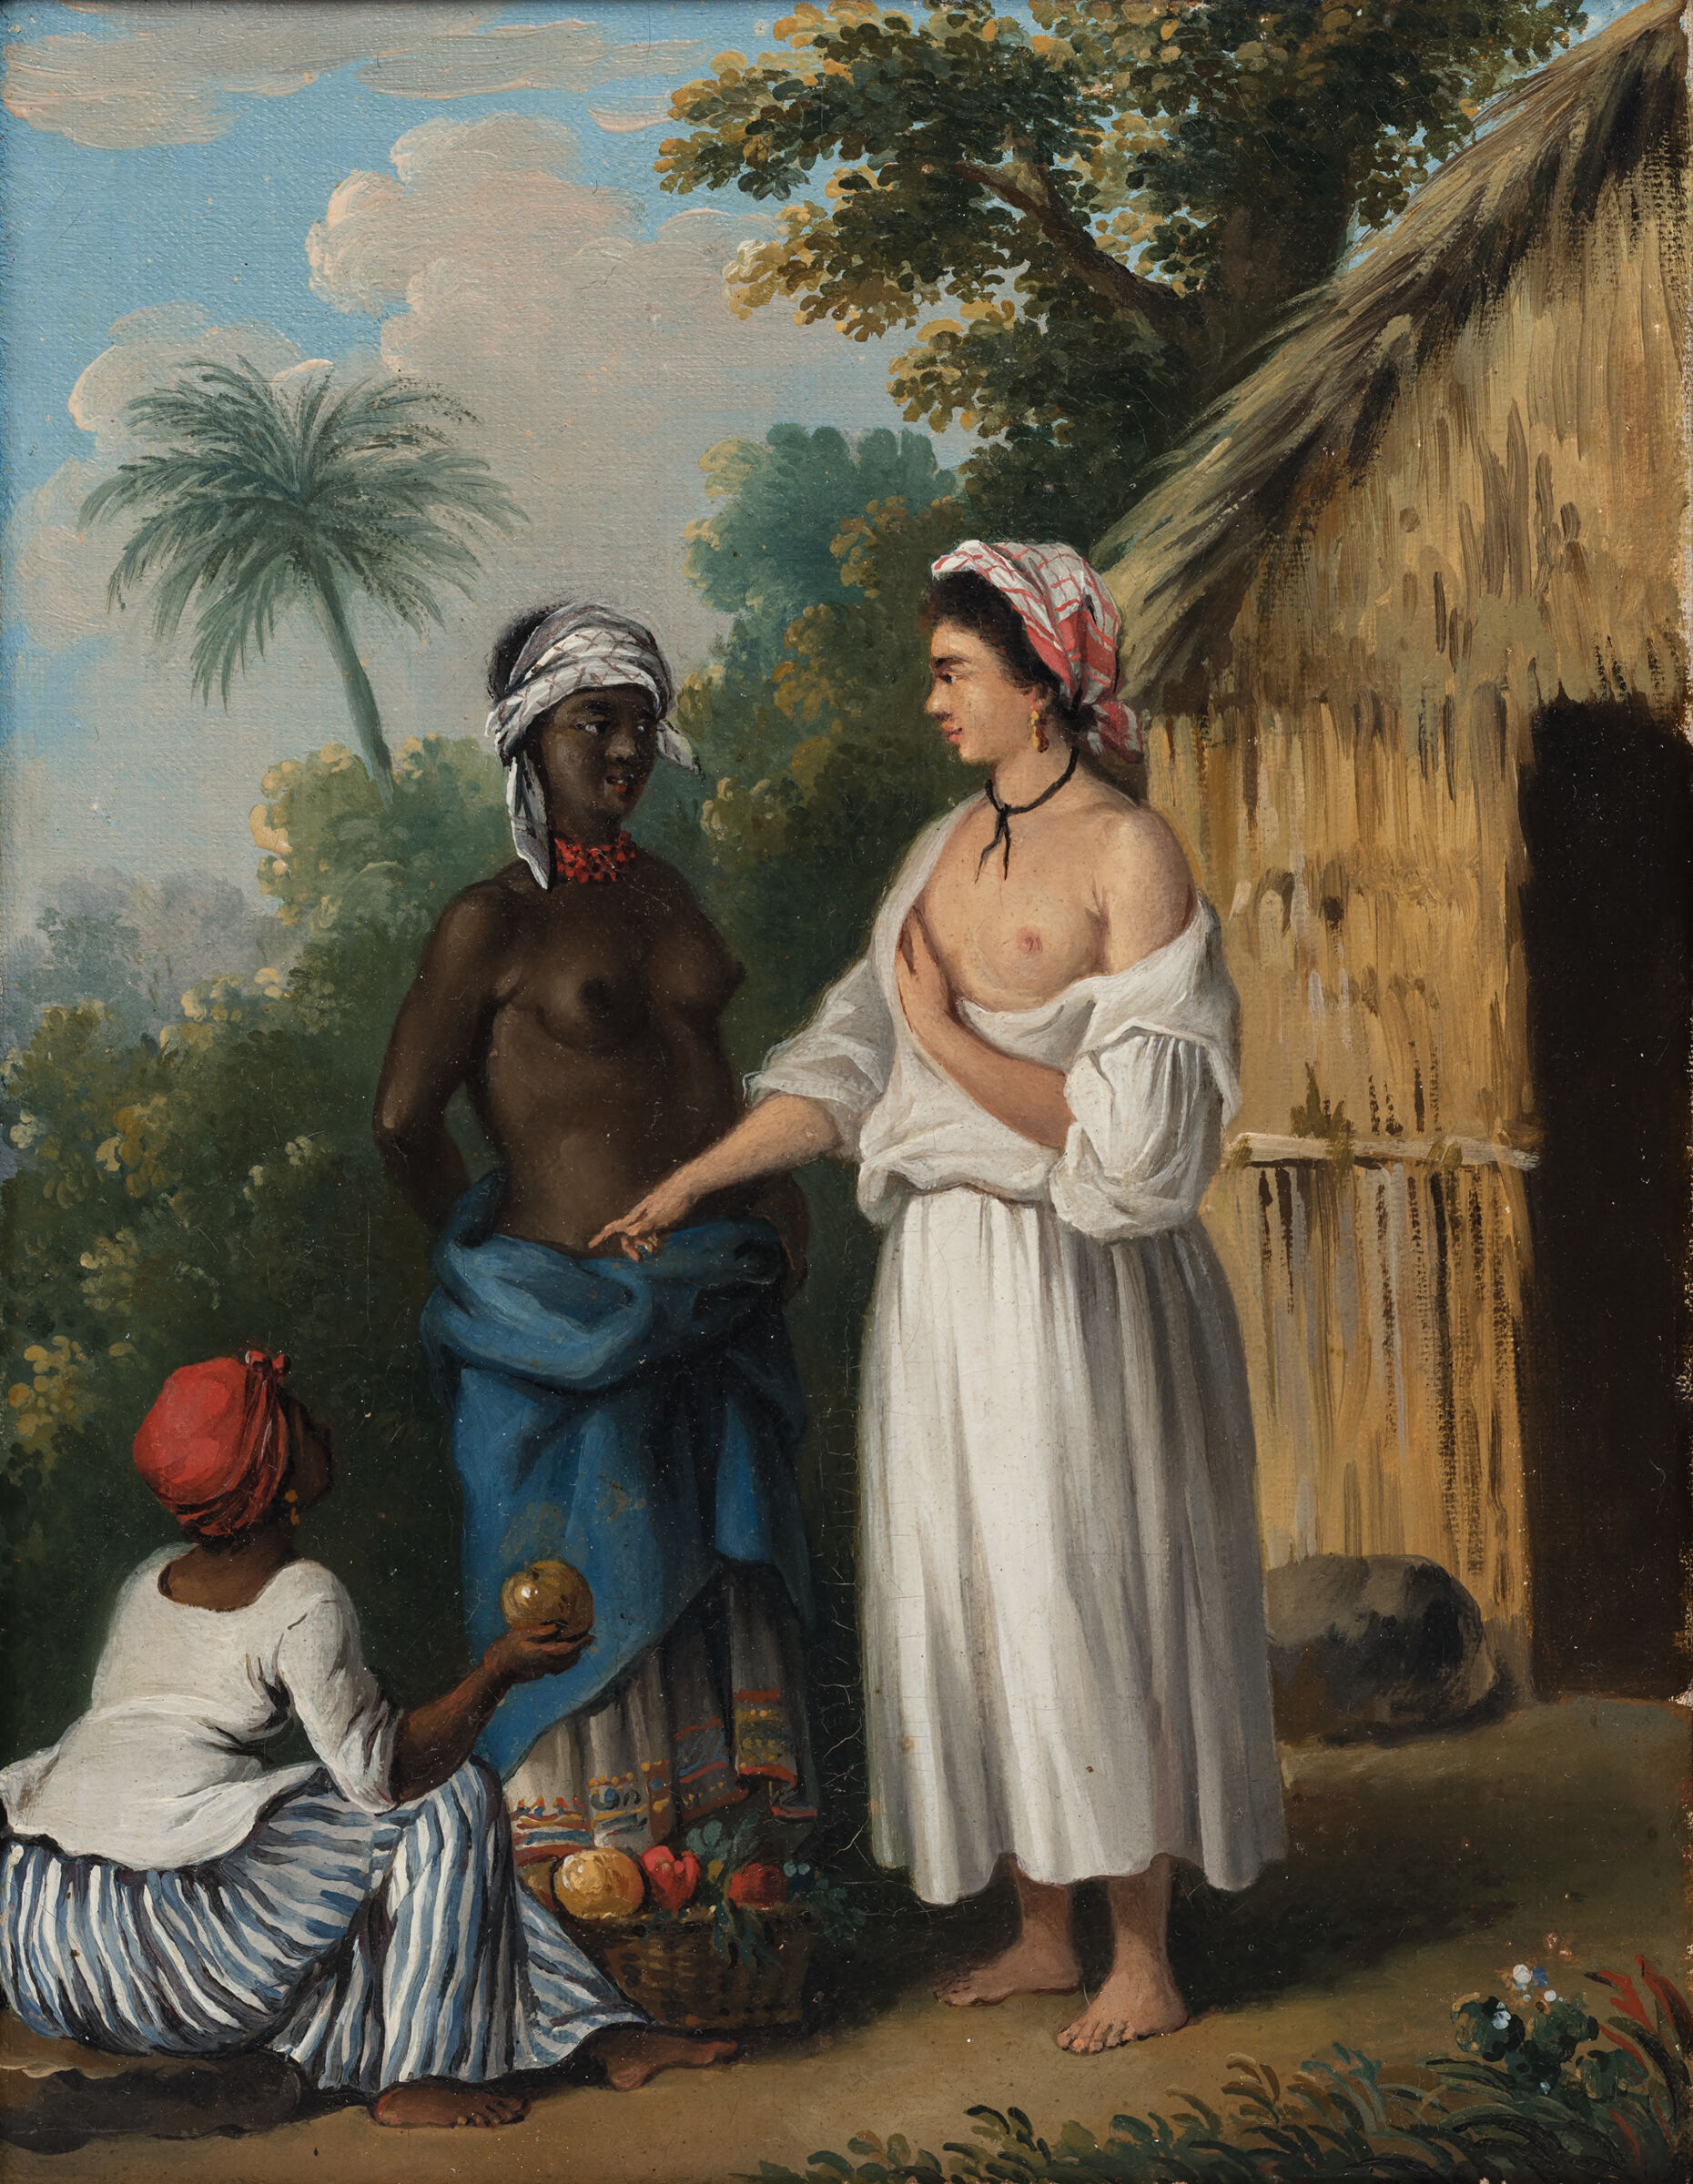 Purchasing Fruit [A French Mulatress Purchasing Fruit From A Negro Wench]